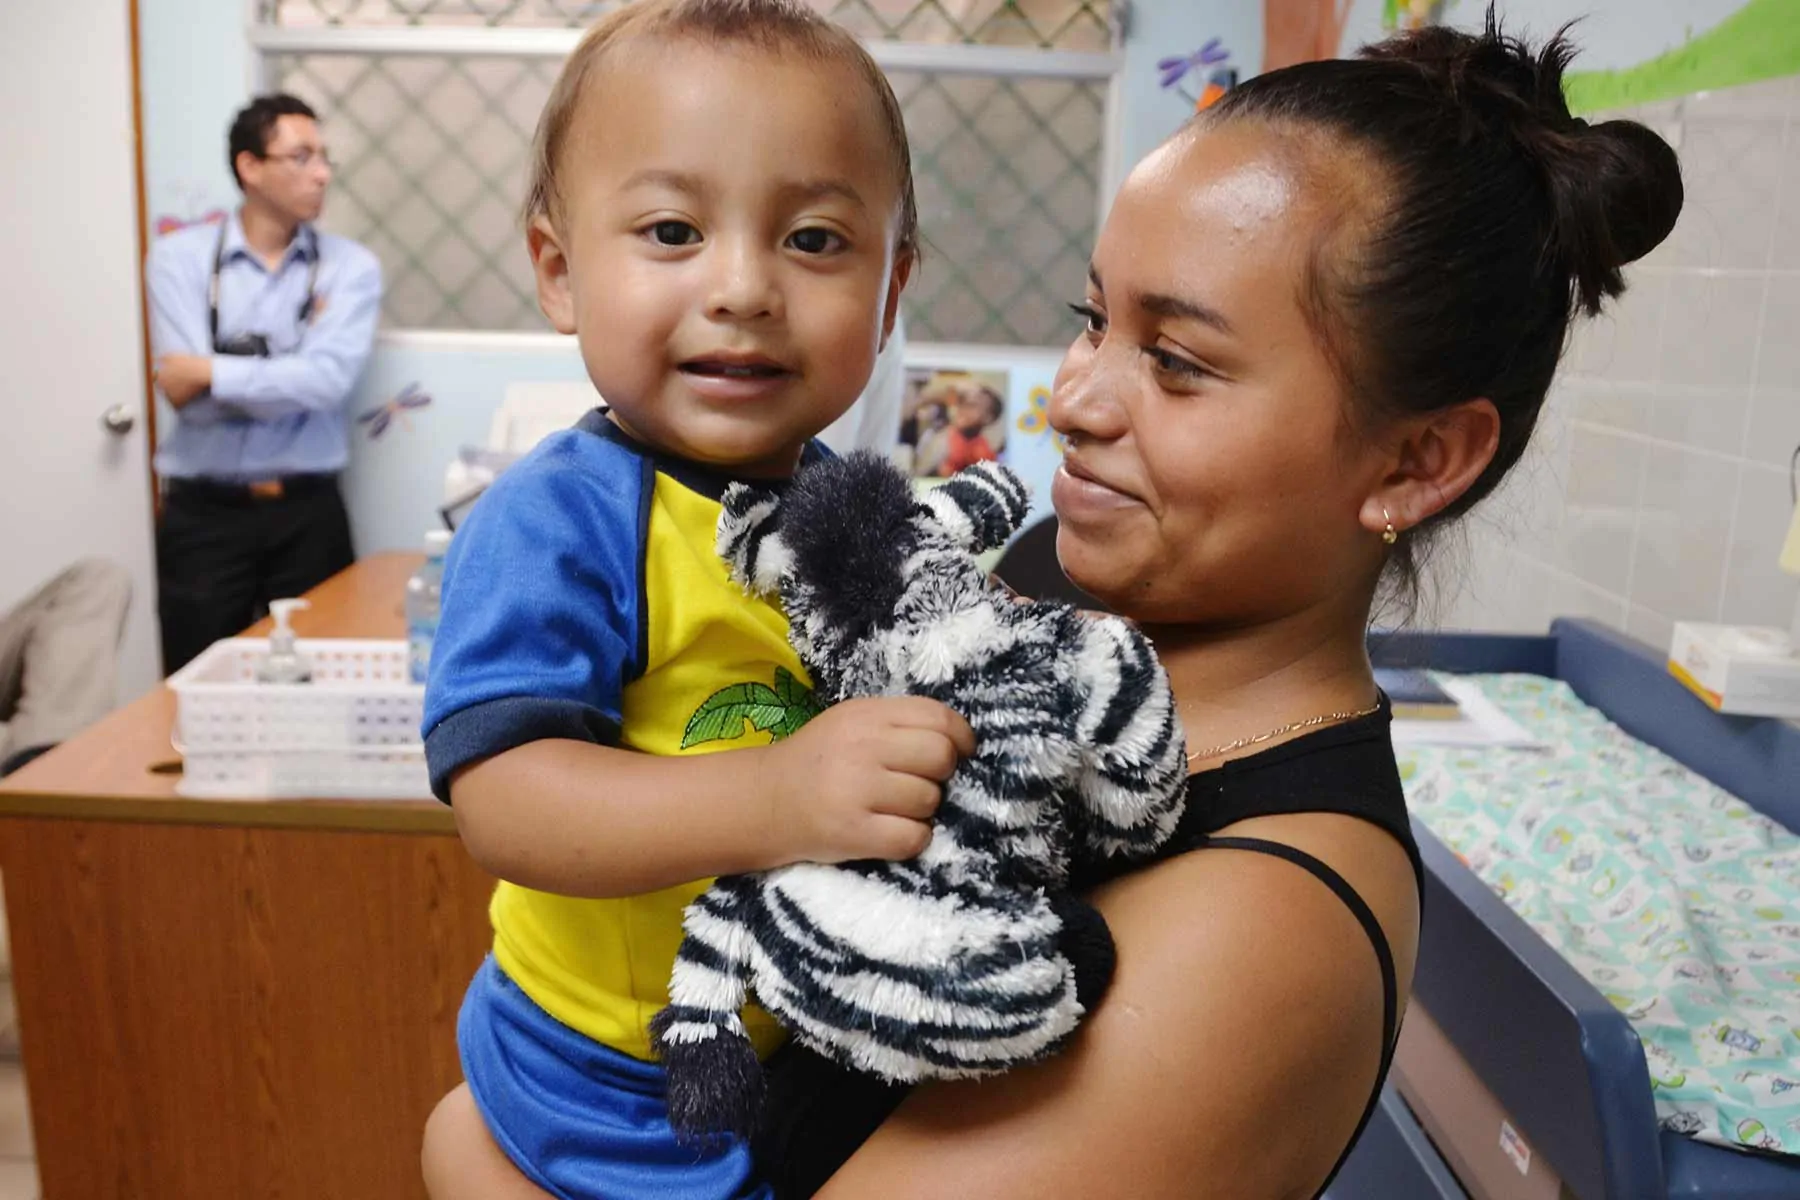 Mother and child at the El Salvador clinic